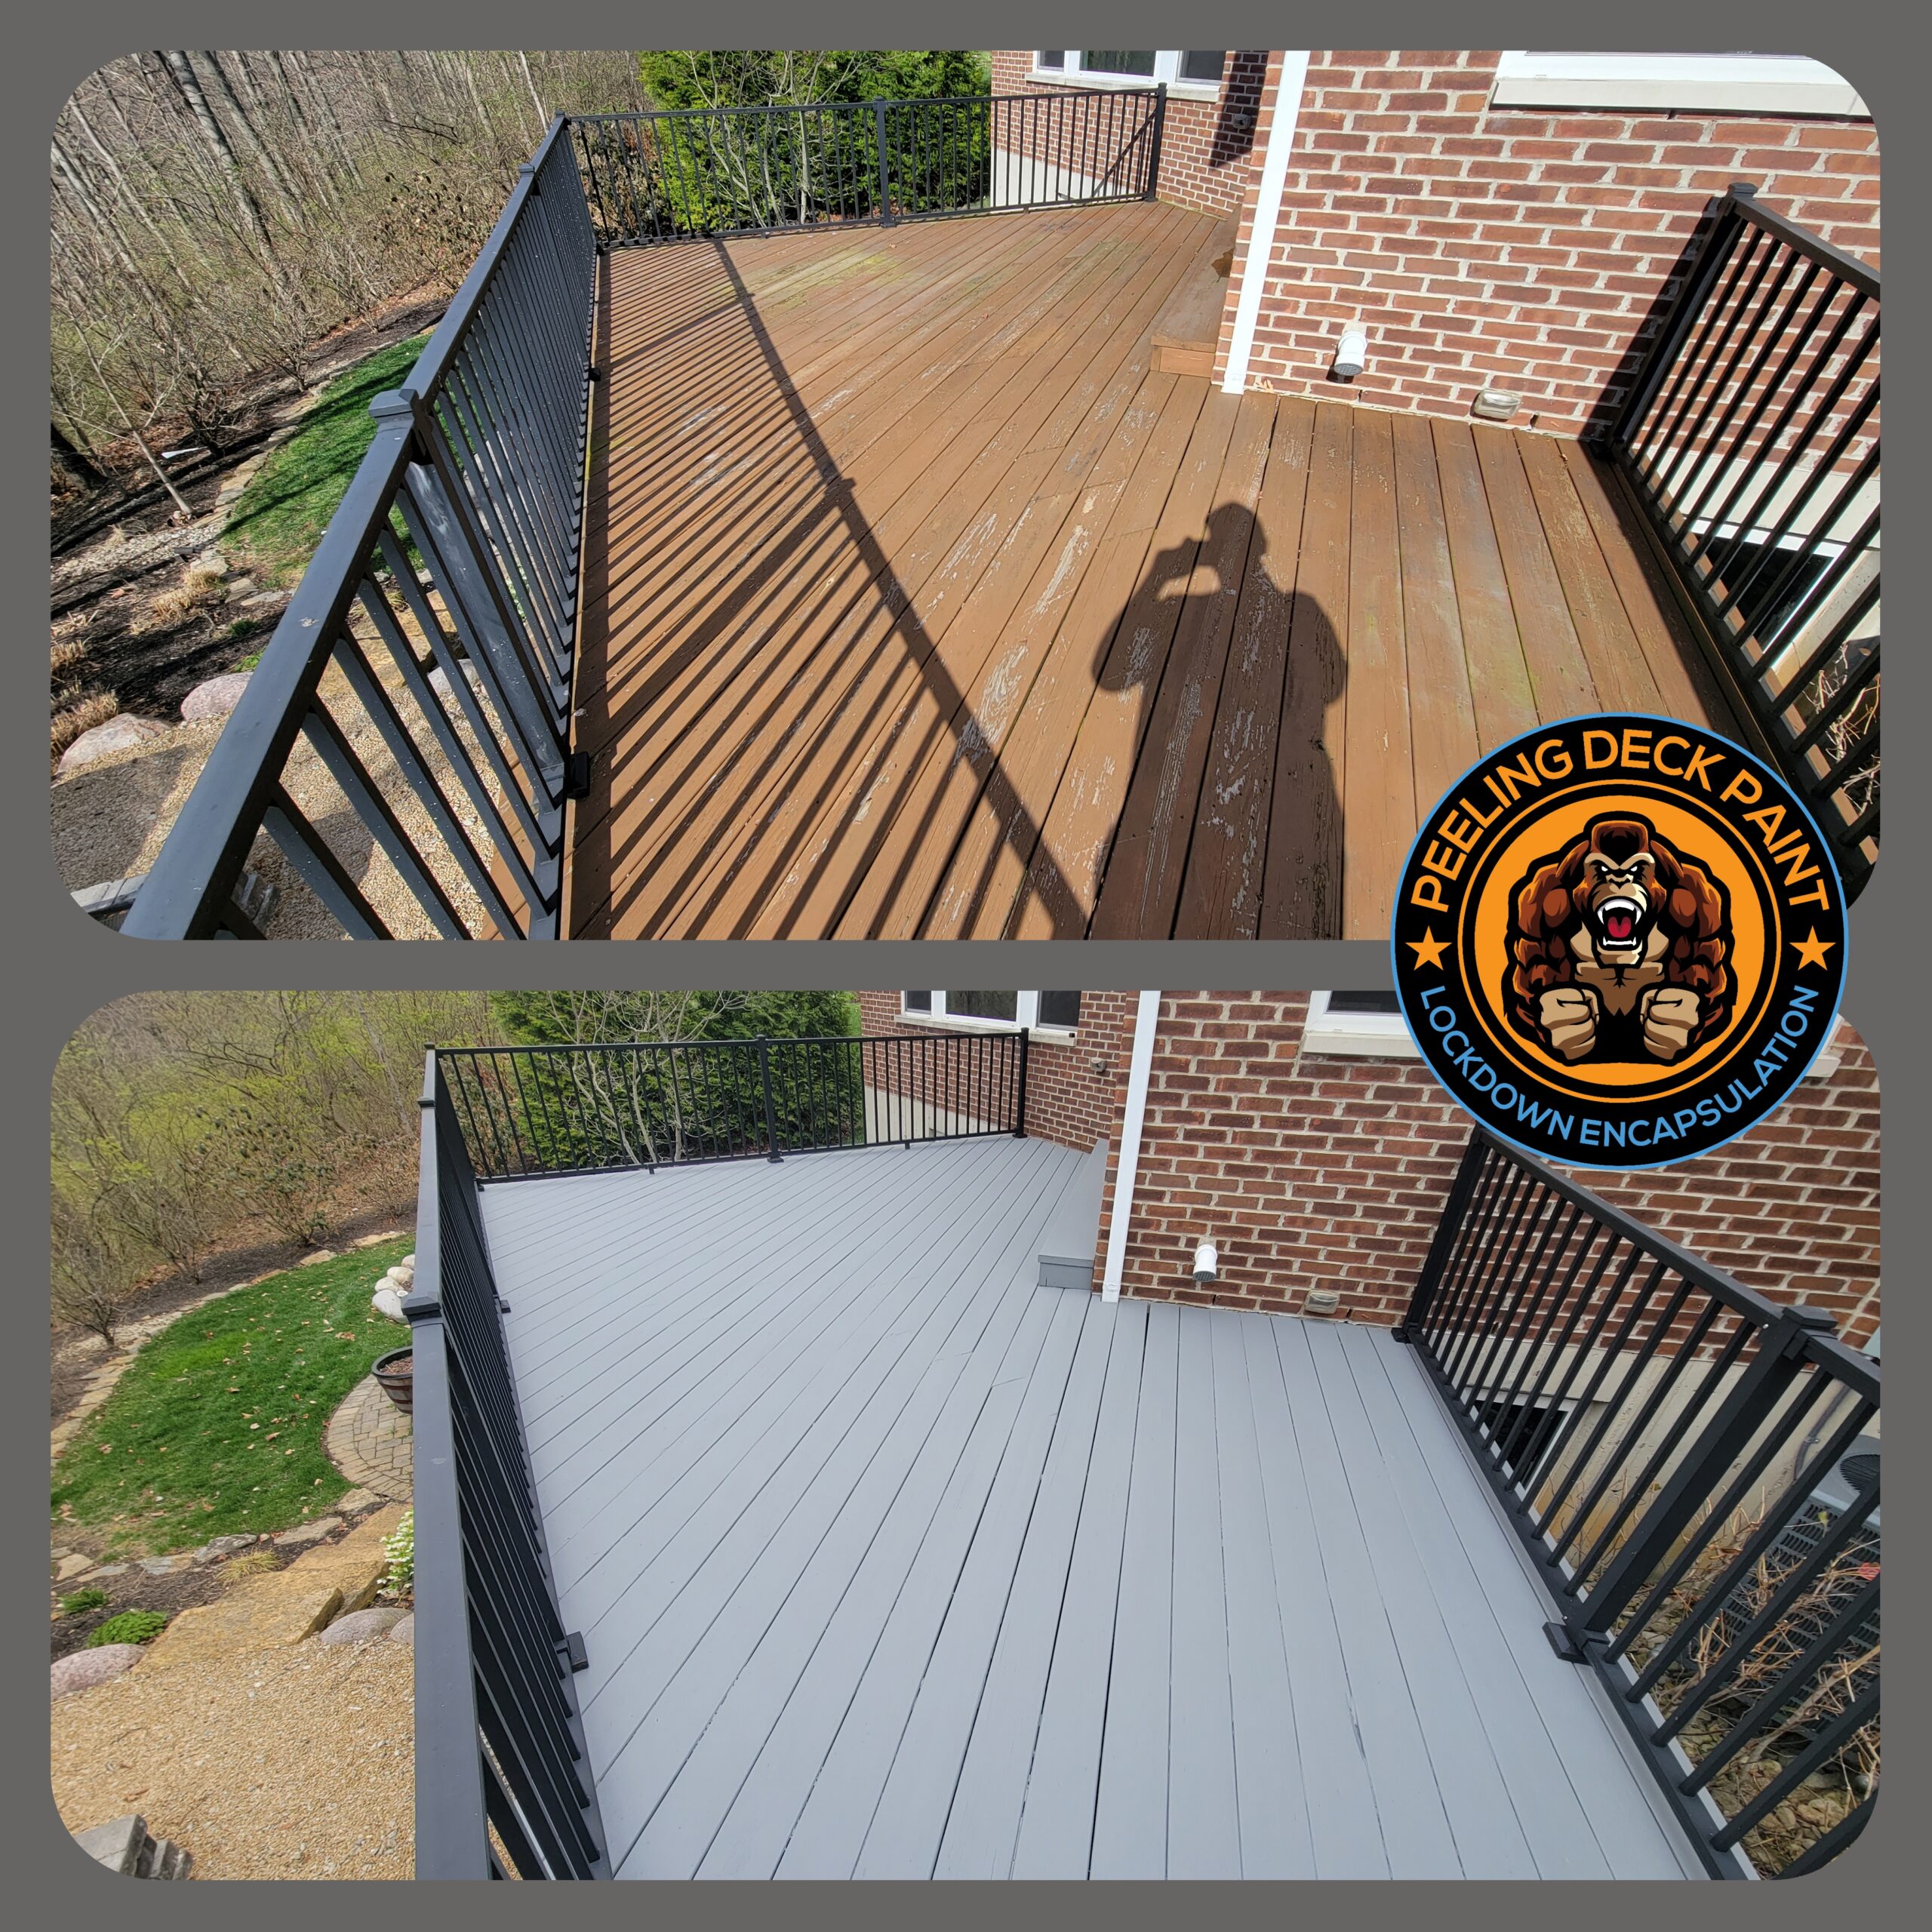 Northern Kentucky deck with peeling deck paint is encapsulated and locked down by Kong Armor and its deck restoration painters